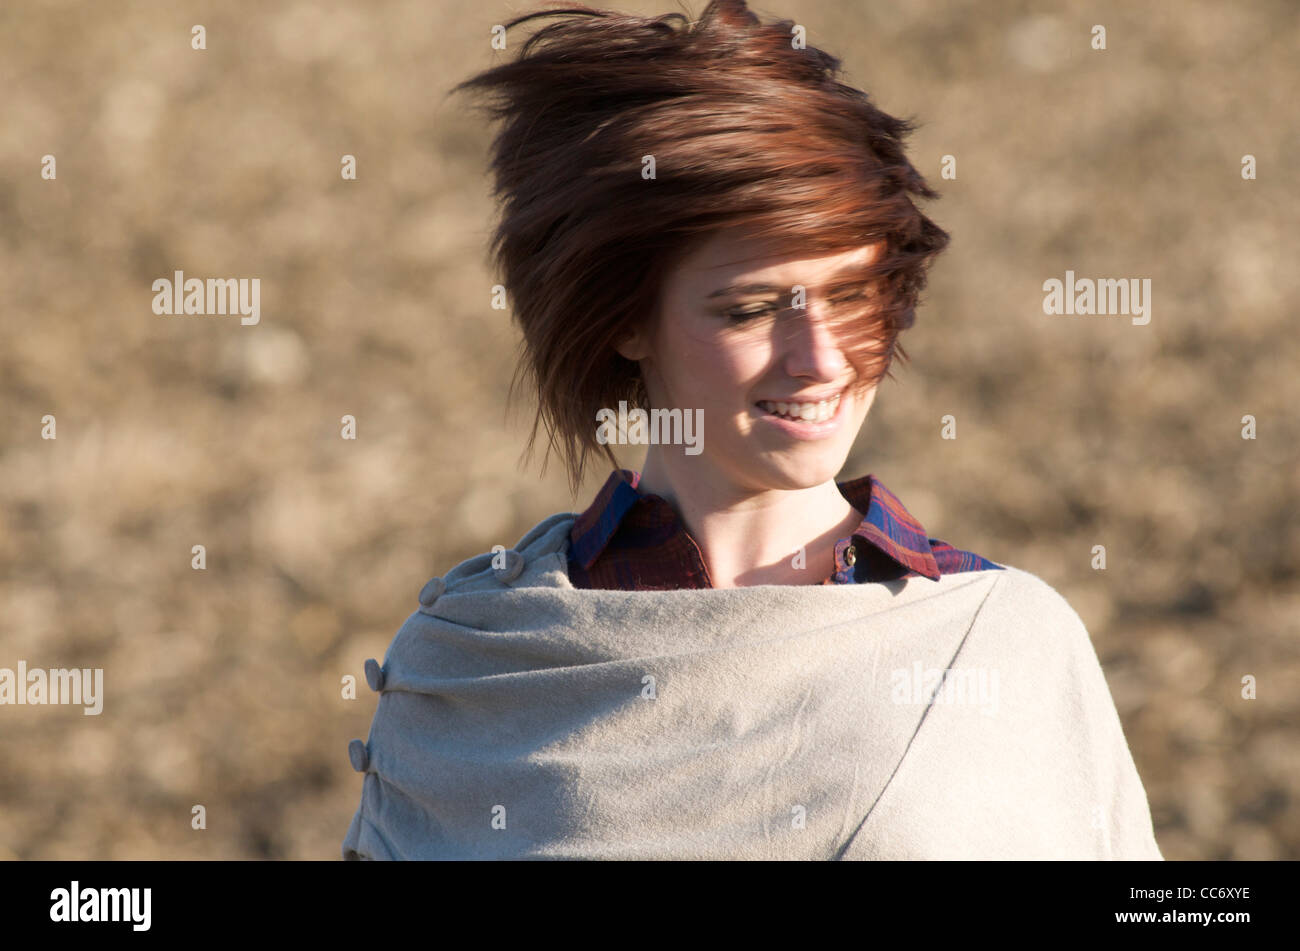 Young woman in a field with hair in the wind. Stock Photo